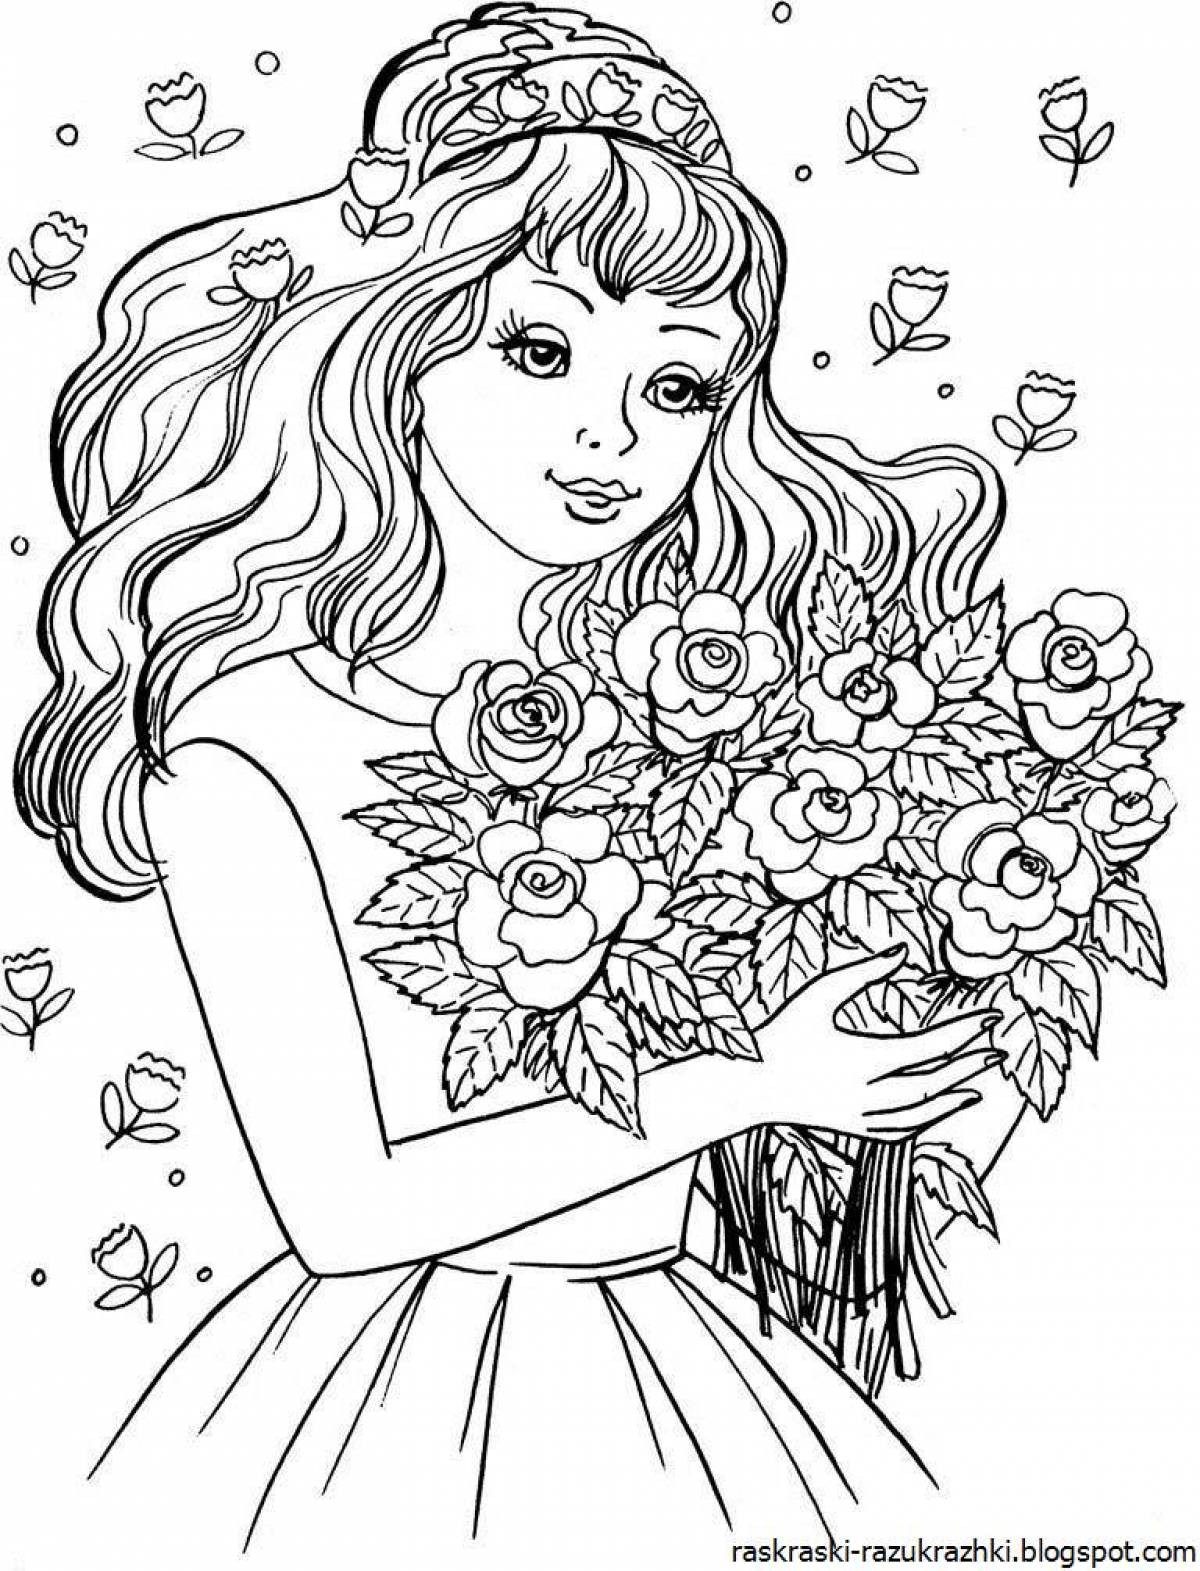 Colorful girly coloring book